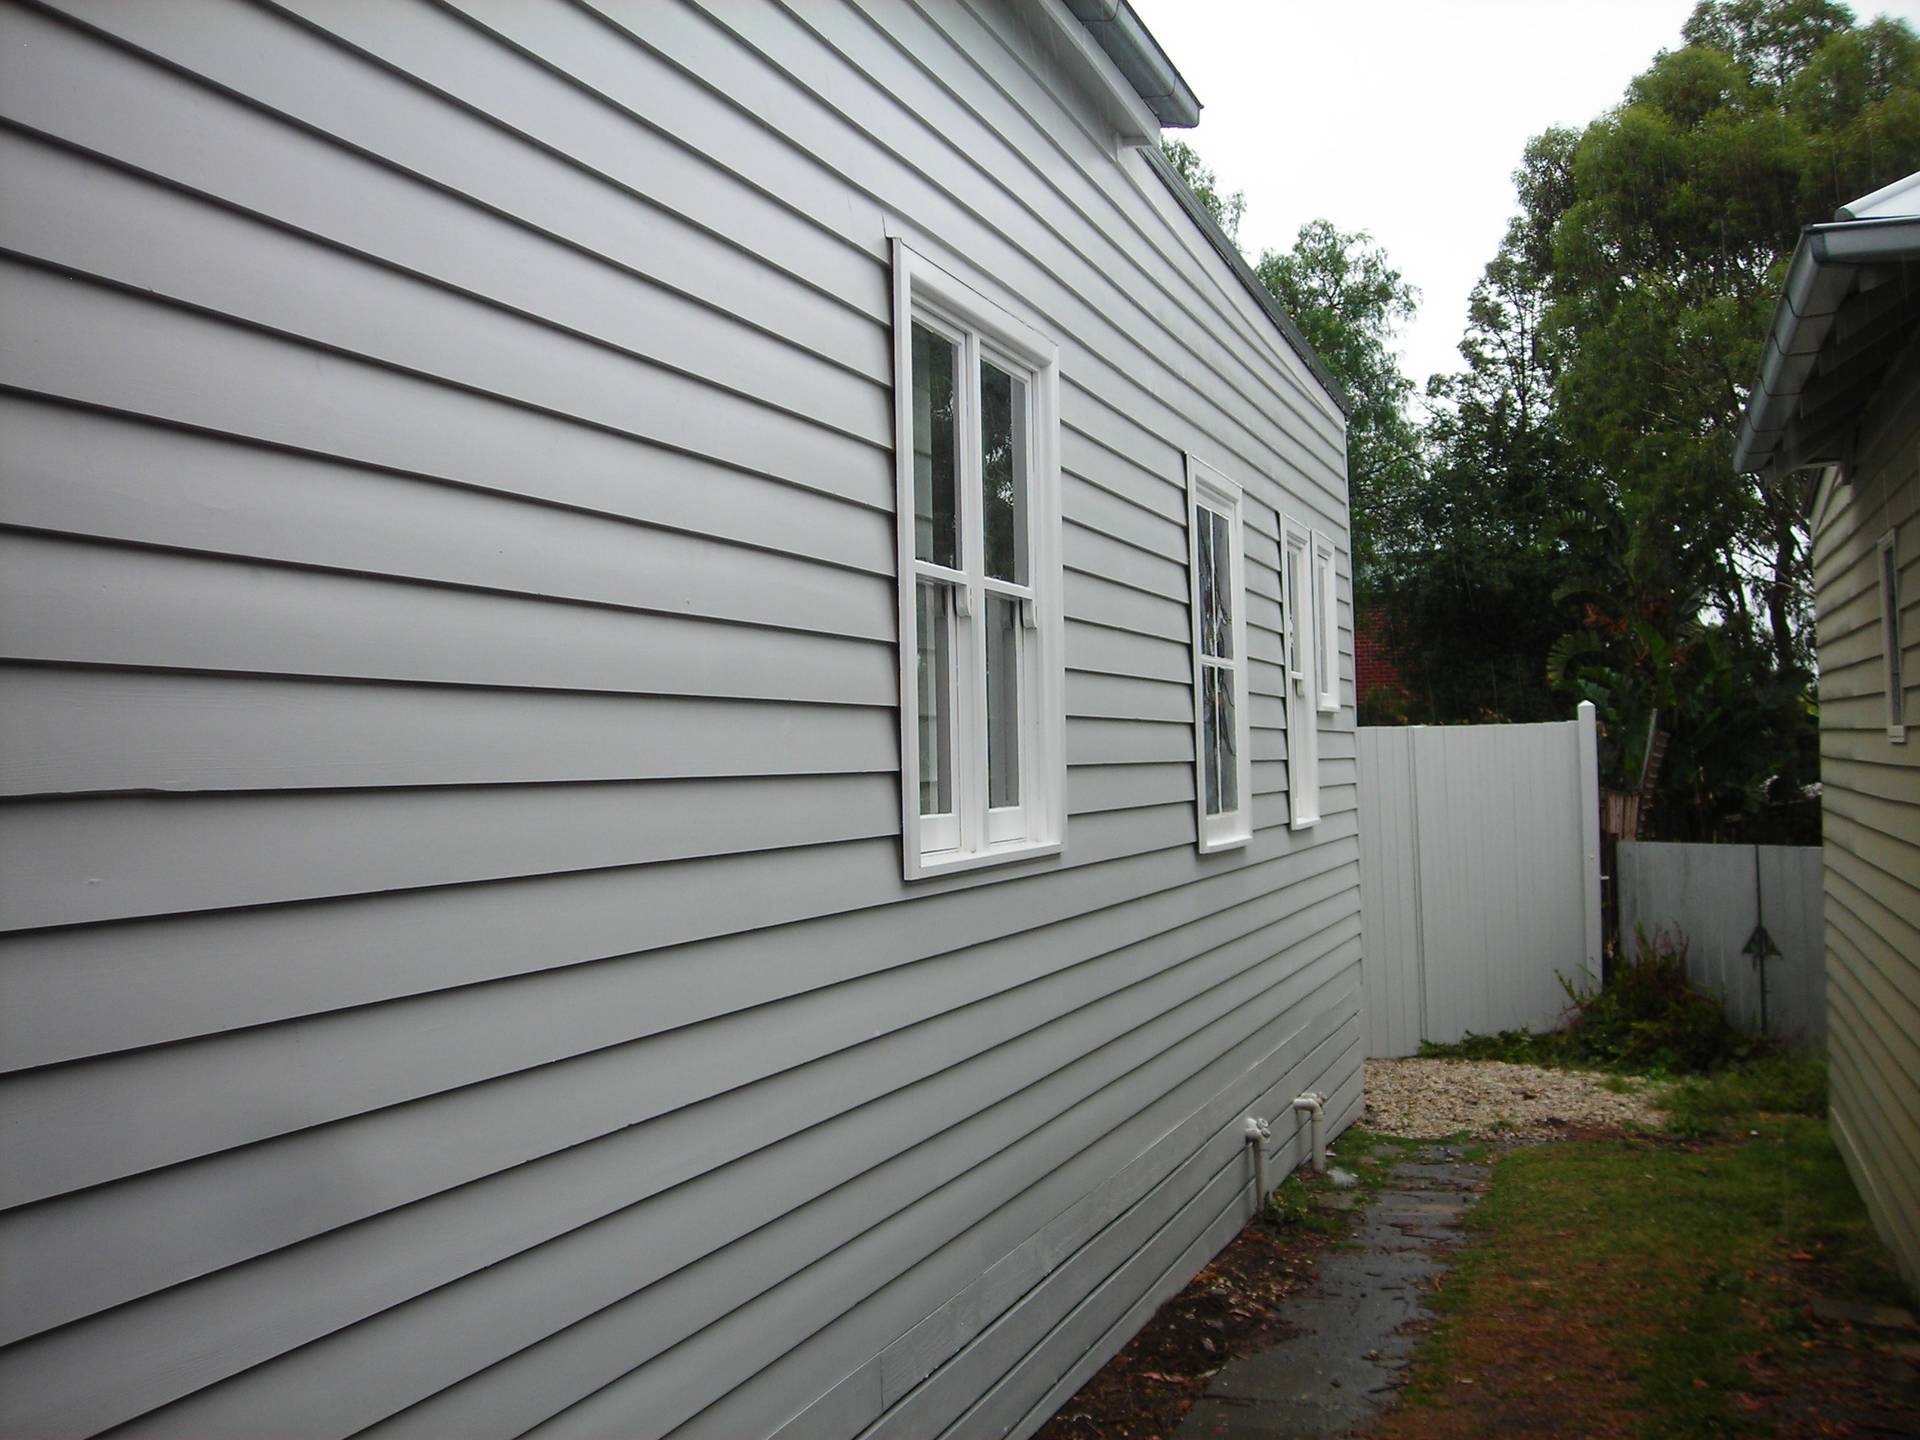 Freshly painted and completed renovation to the external walls.